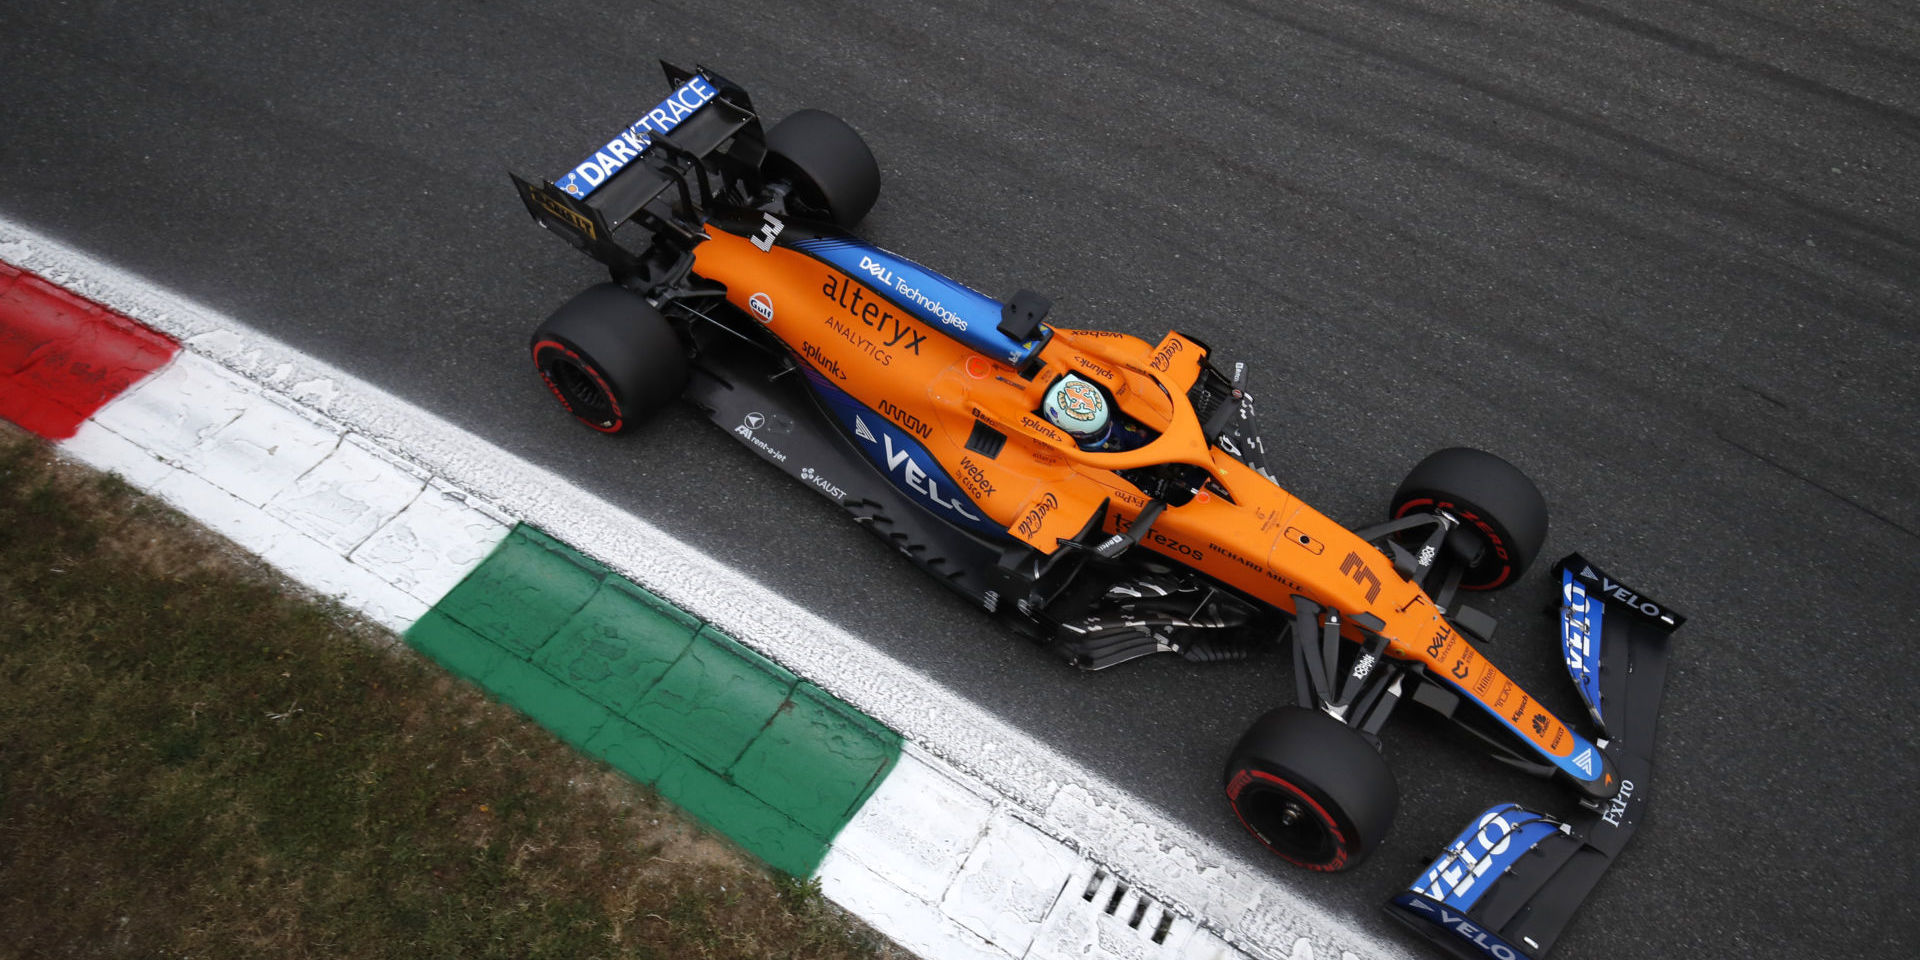 Mclaren Best Of The Rest In Monza Qualifying F1 Chronicle